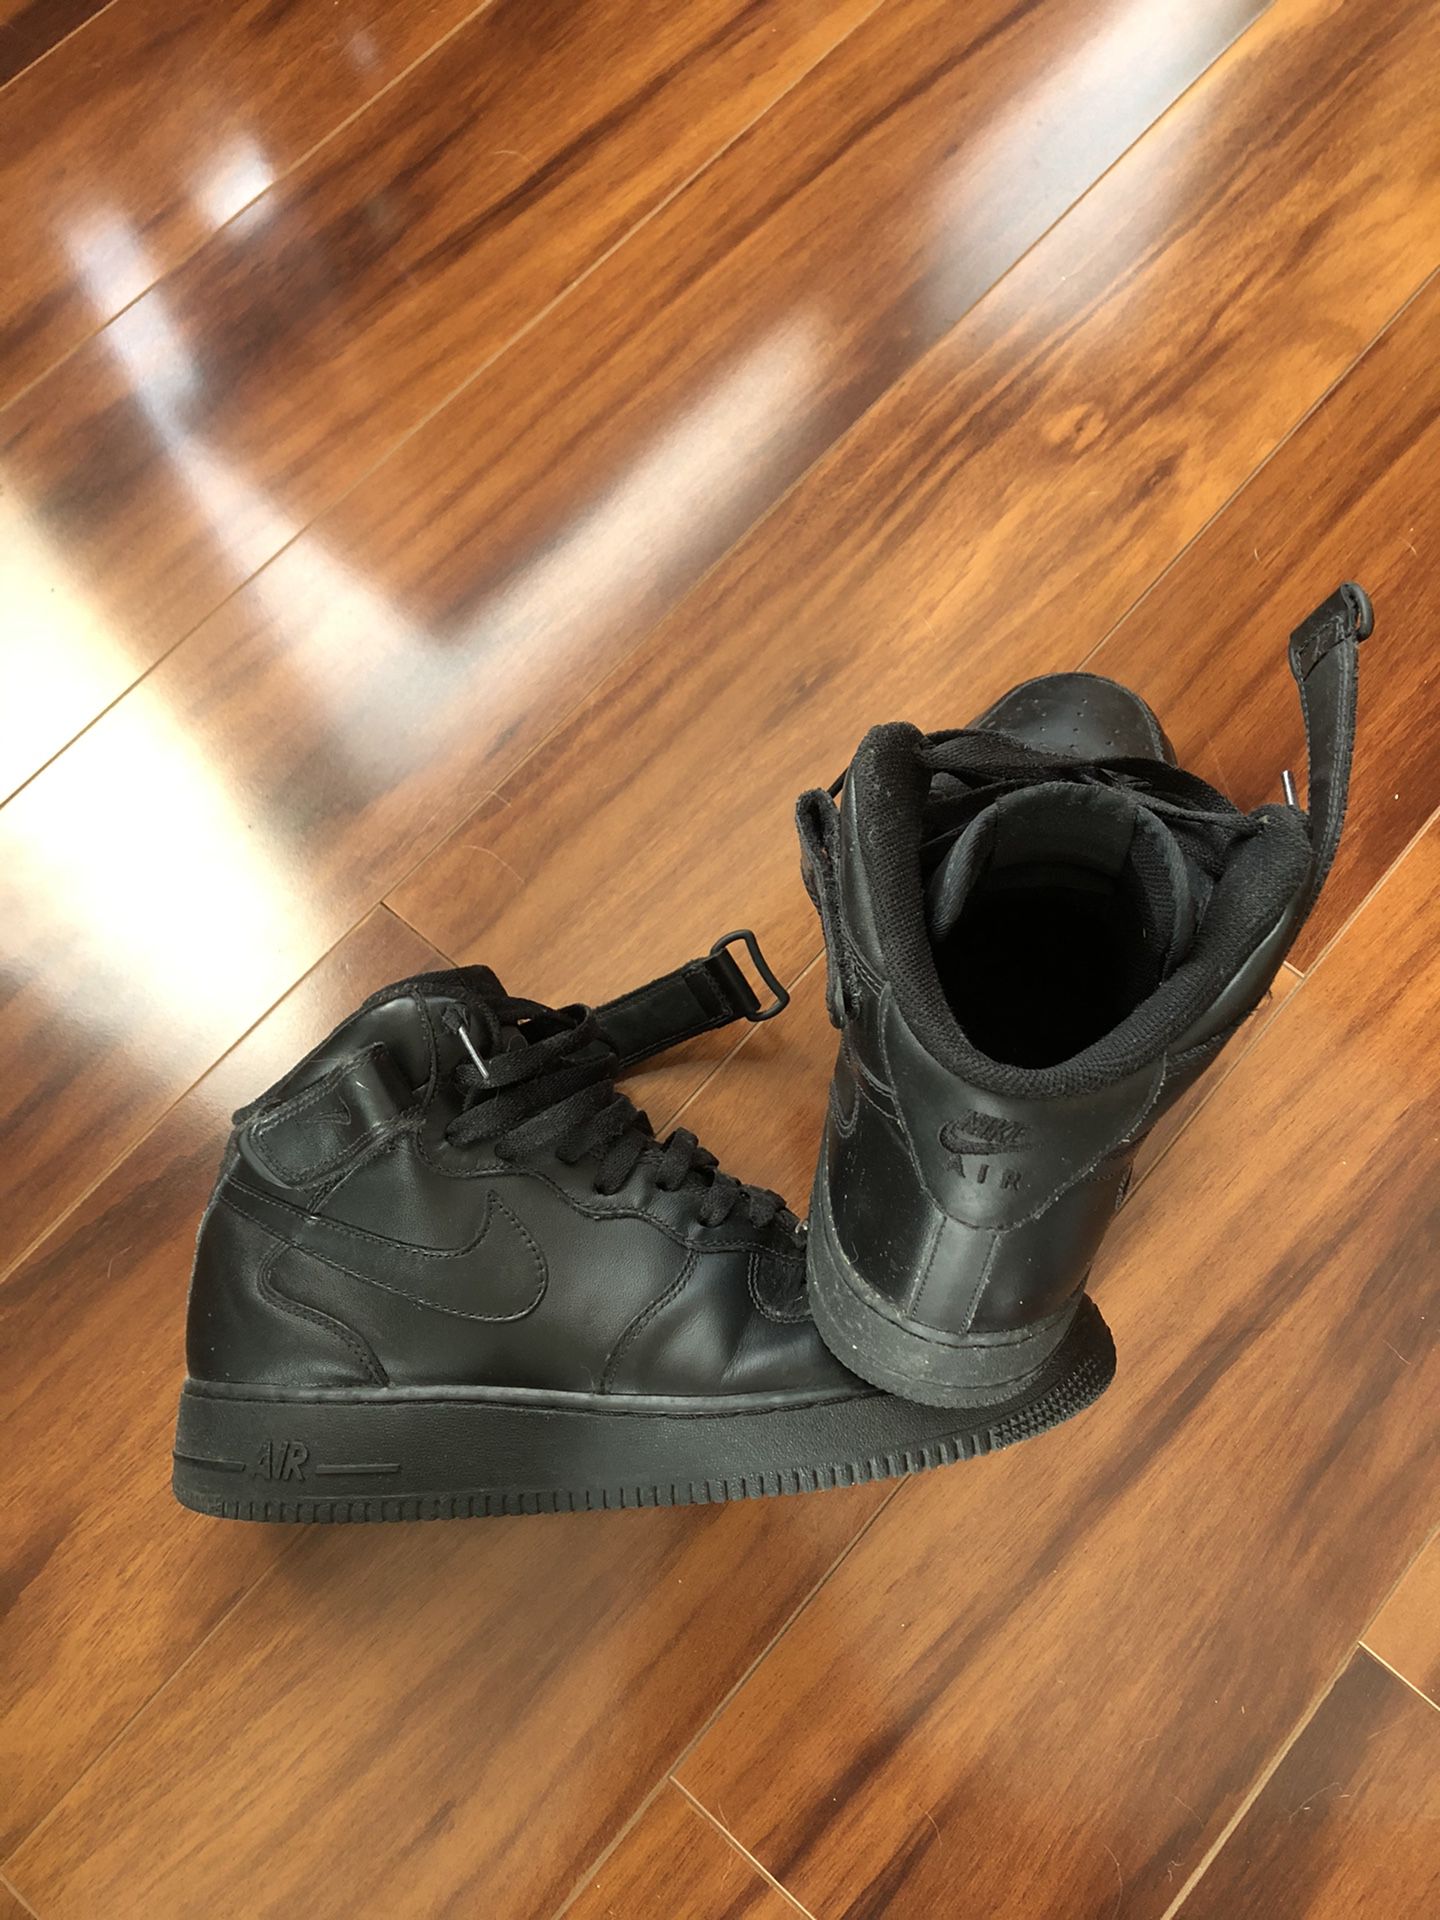 Nike and van shoes make offer